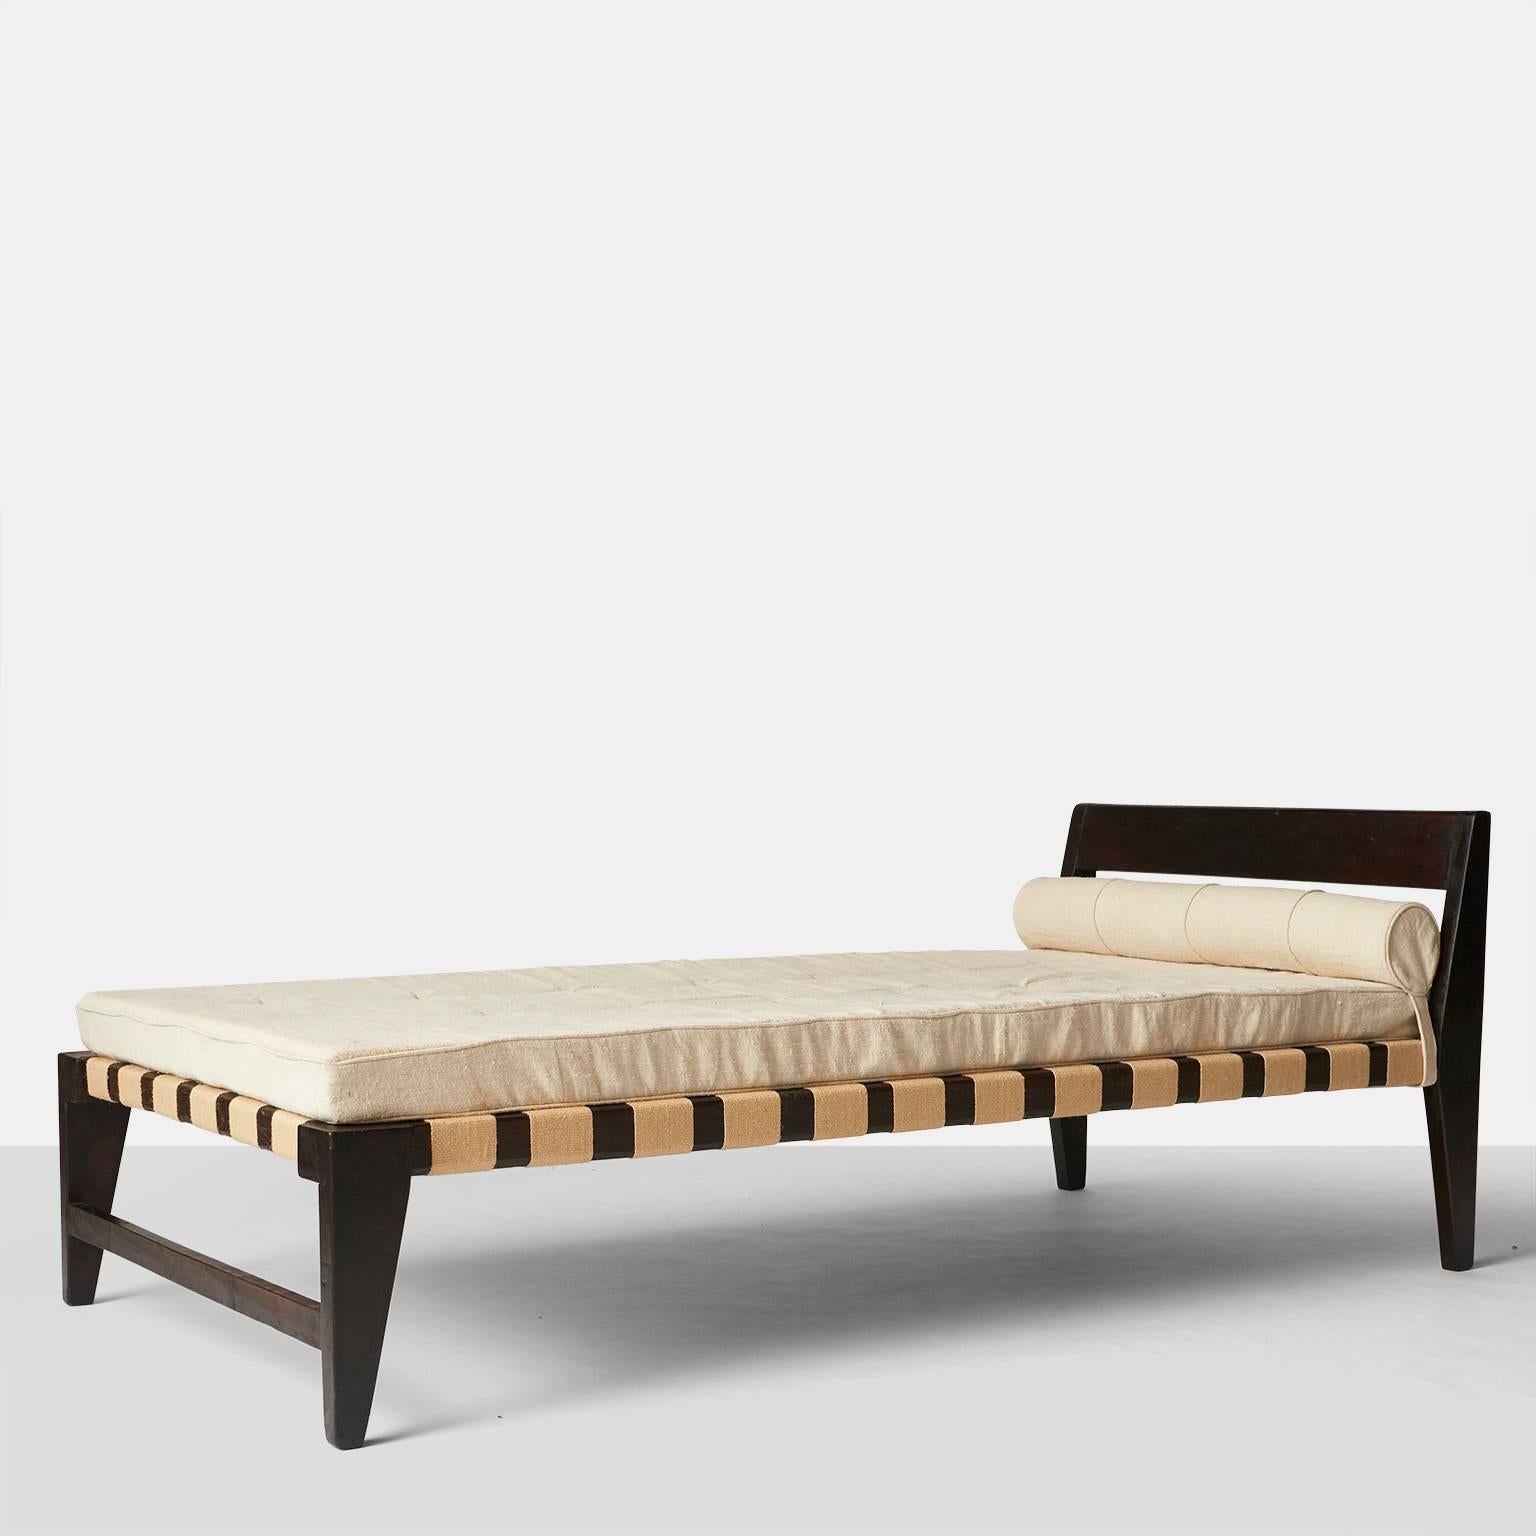 A daybed by Pierre Jeanneret from Chandigarh India made in 1955. The frame is in teak with a dark stain finish and cushion upholstered in a natural color linen.
Provenance: Chandigarh, India Private collection, Paris.
 